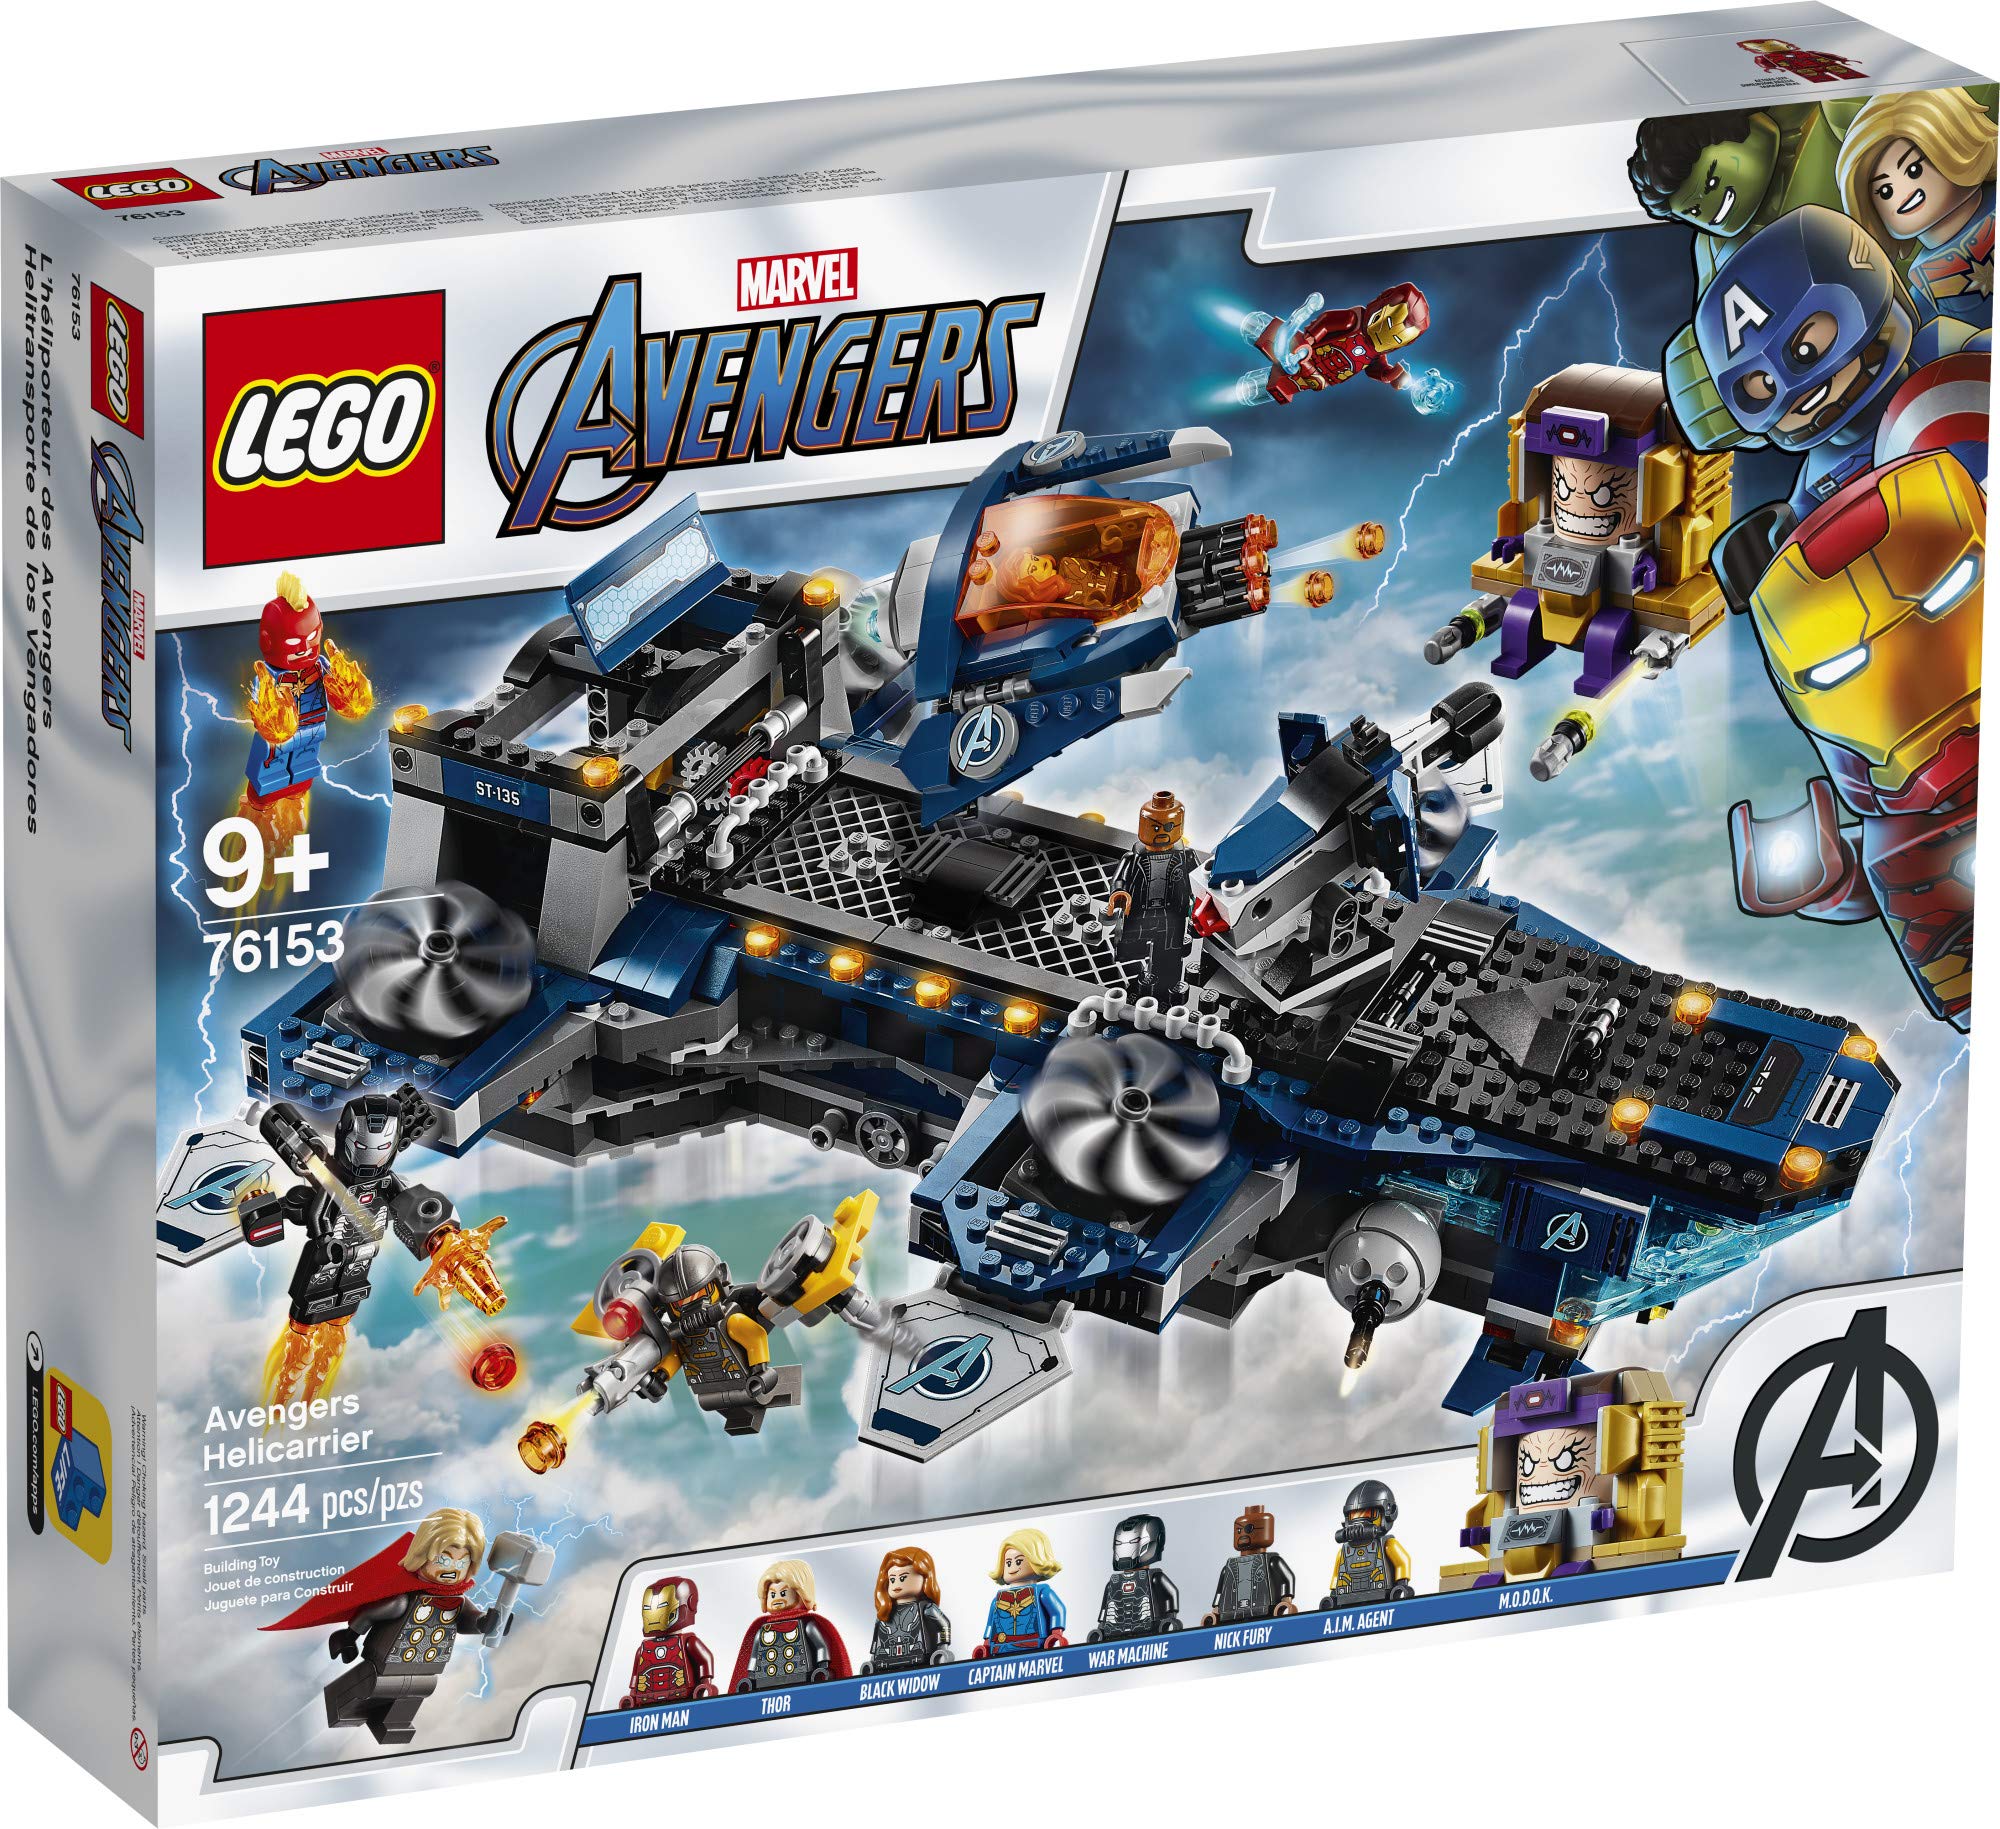 LEGO Marvel Avengers Helicarrier 76153 Fun Brick Building Toy with Marvel Avengers Action Minifigures, Great Gift for Kids Who Love Airplanes and Superhero Adventures (1,244 Pieces)